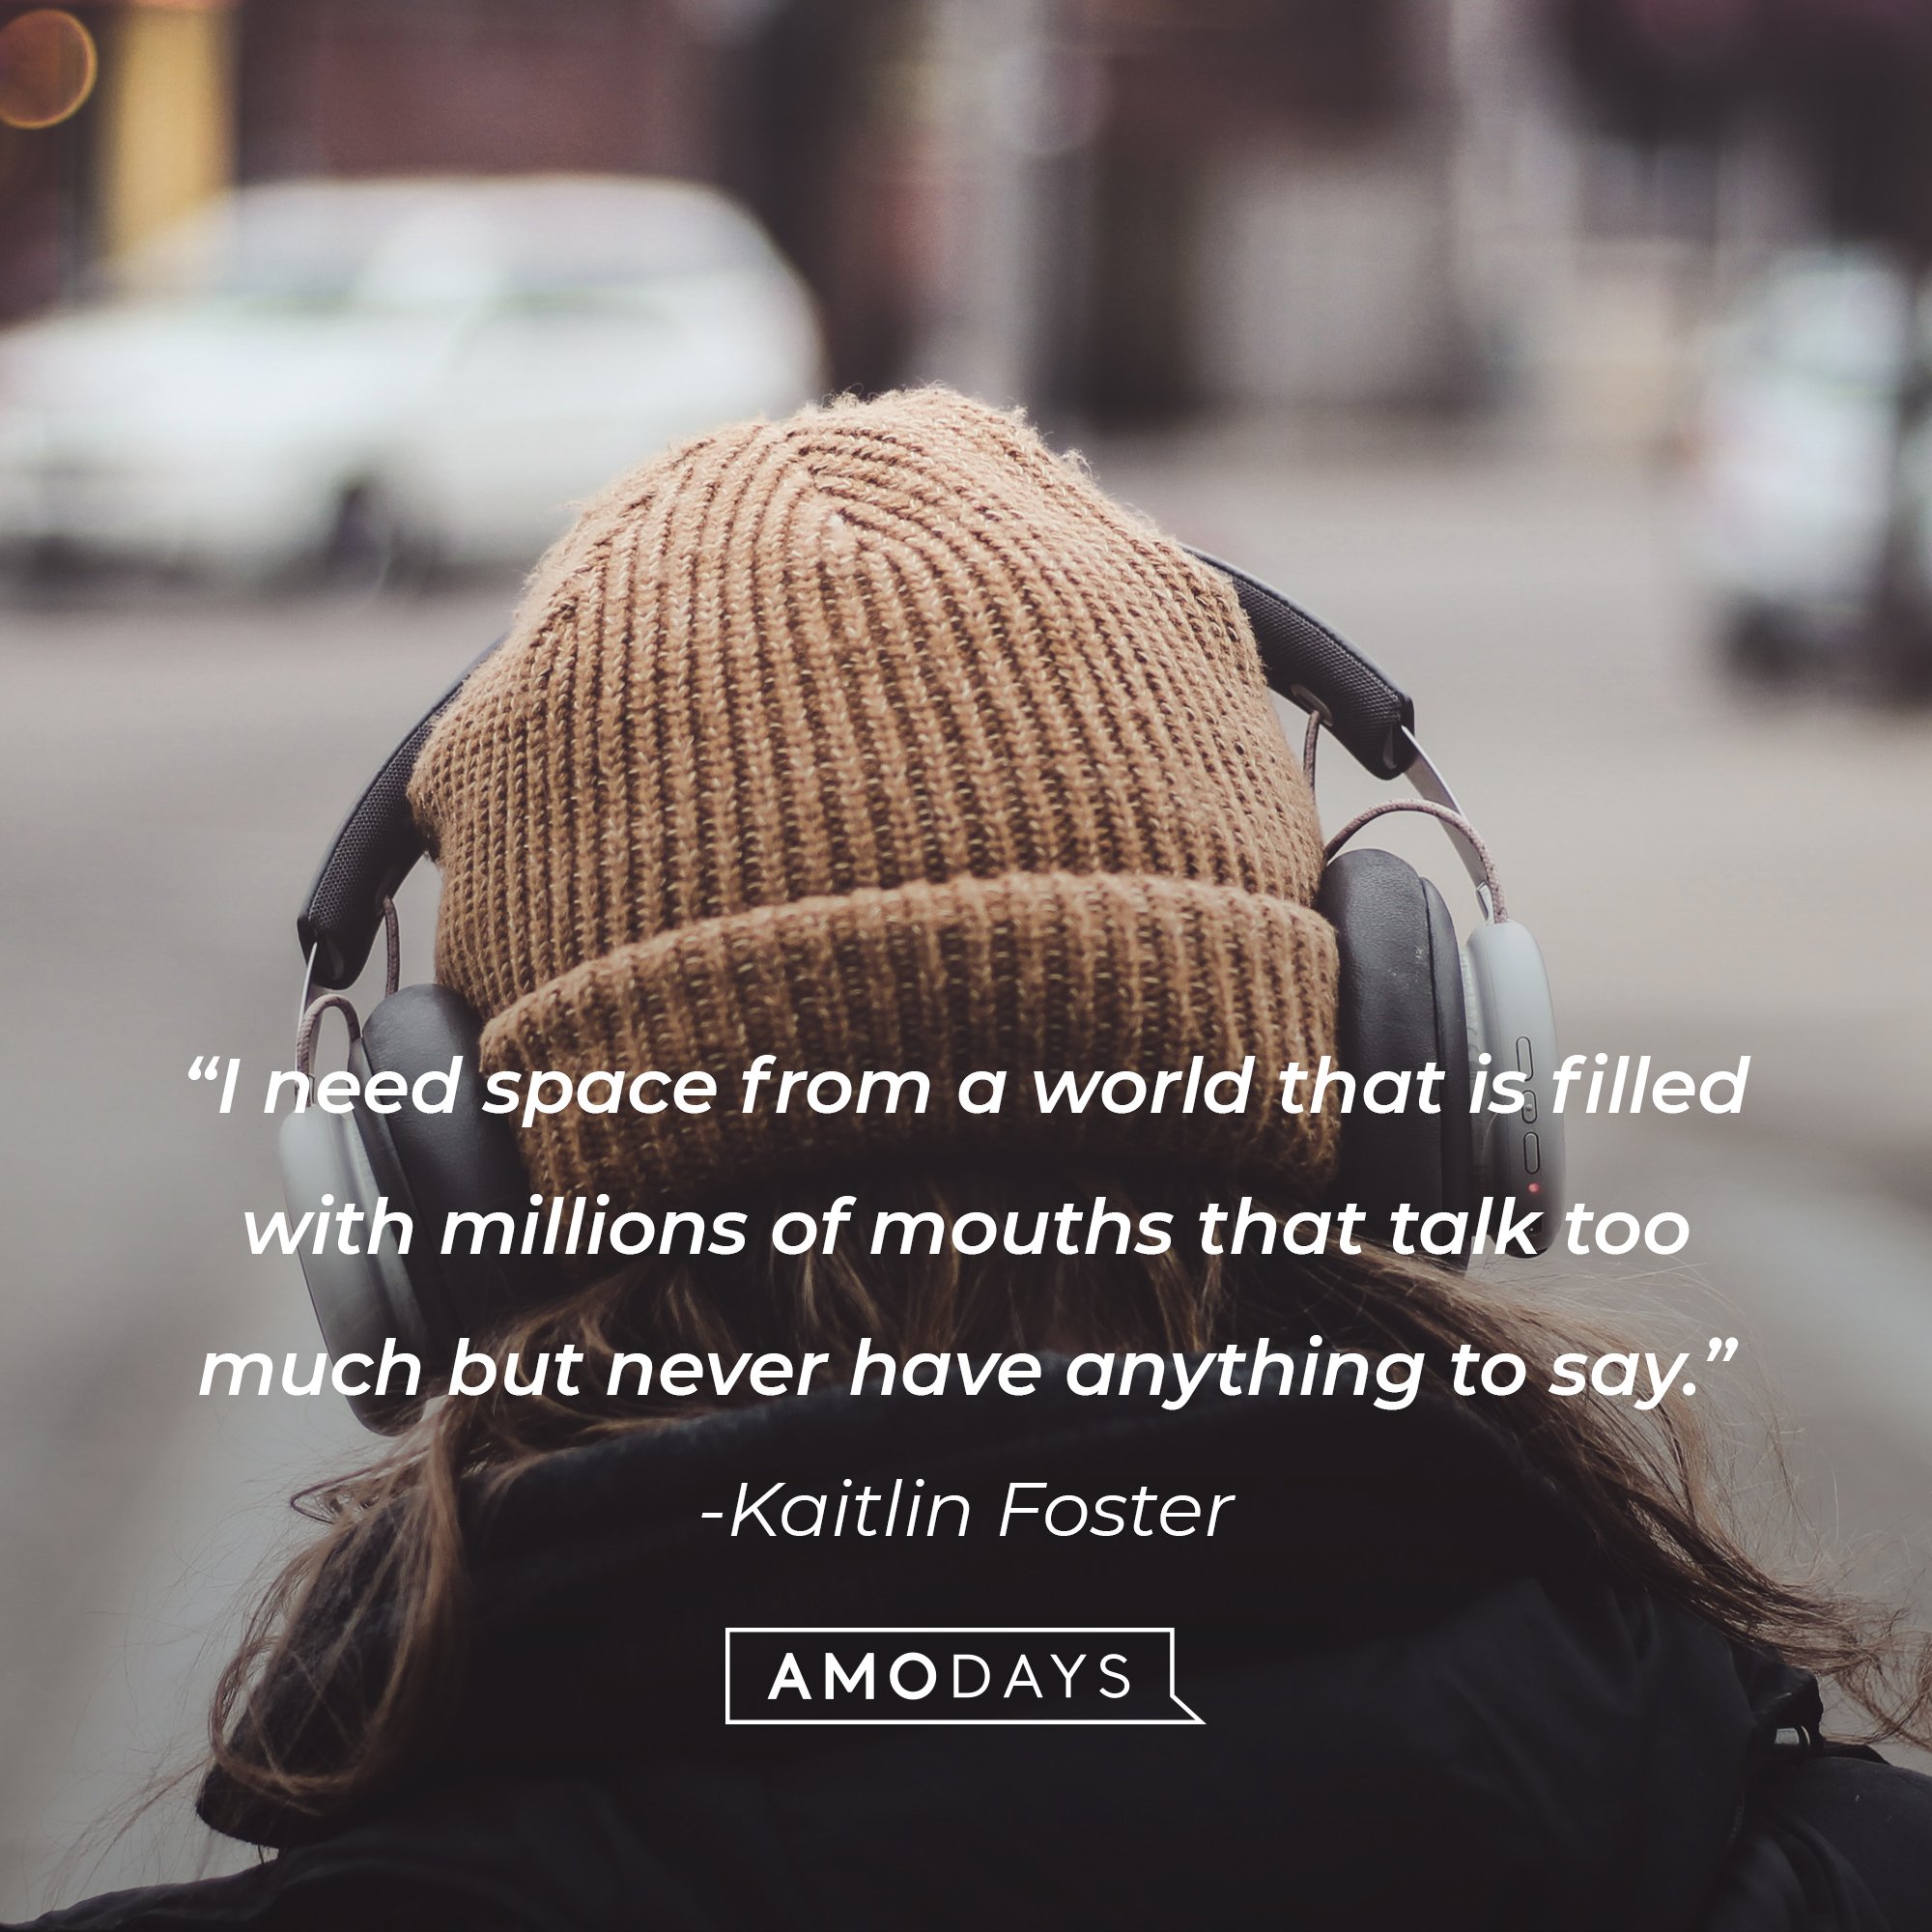 Kaitlin Foster's quote: “I need space from a world that is filled with millions of mouths that talk too much but never have anything to say.” | Image: AmoDays